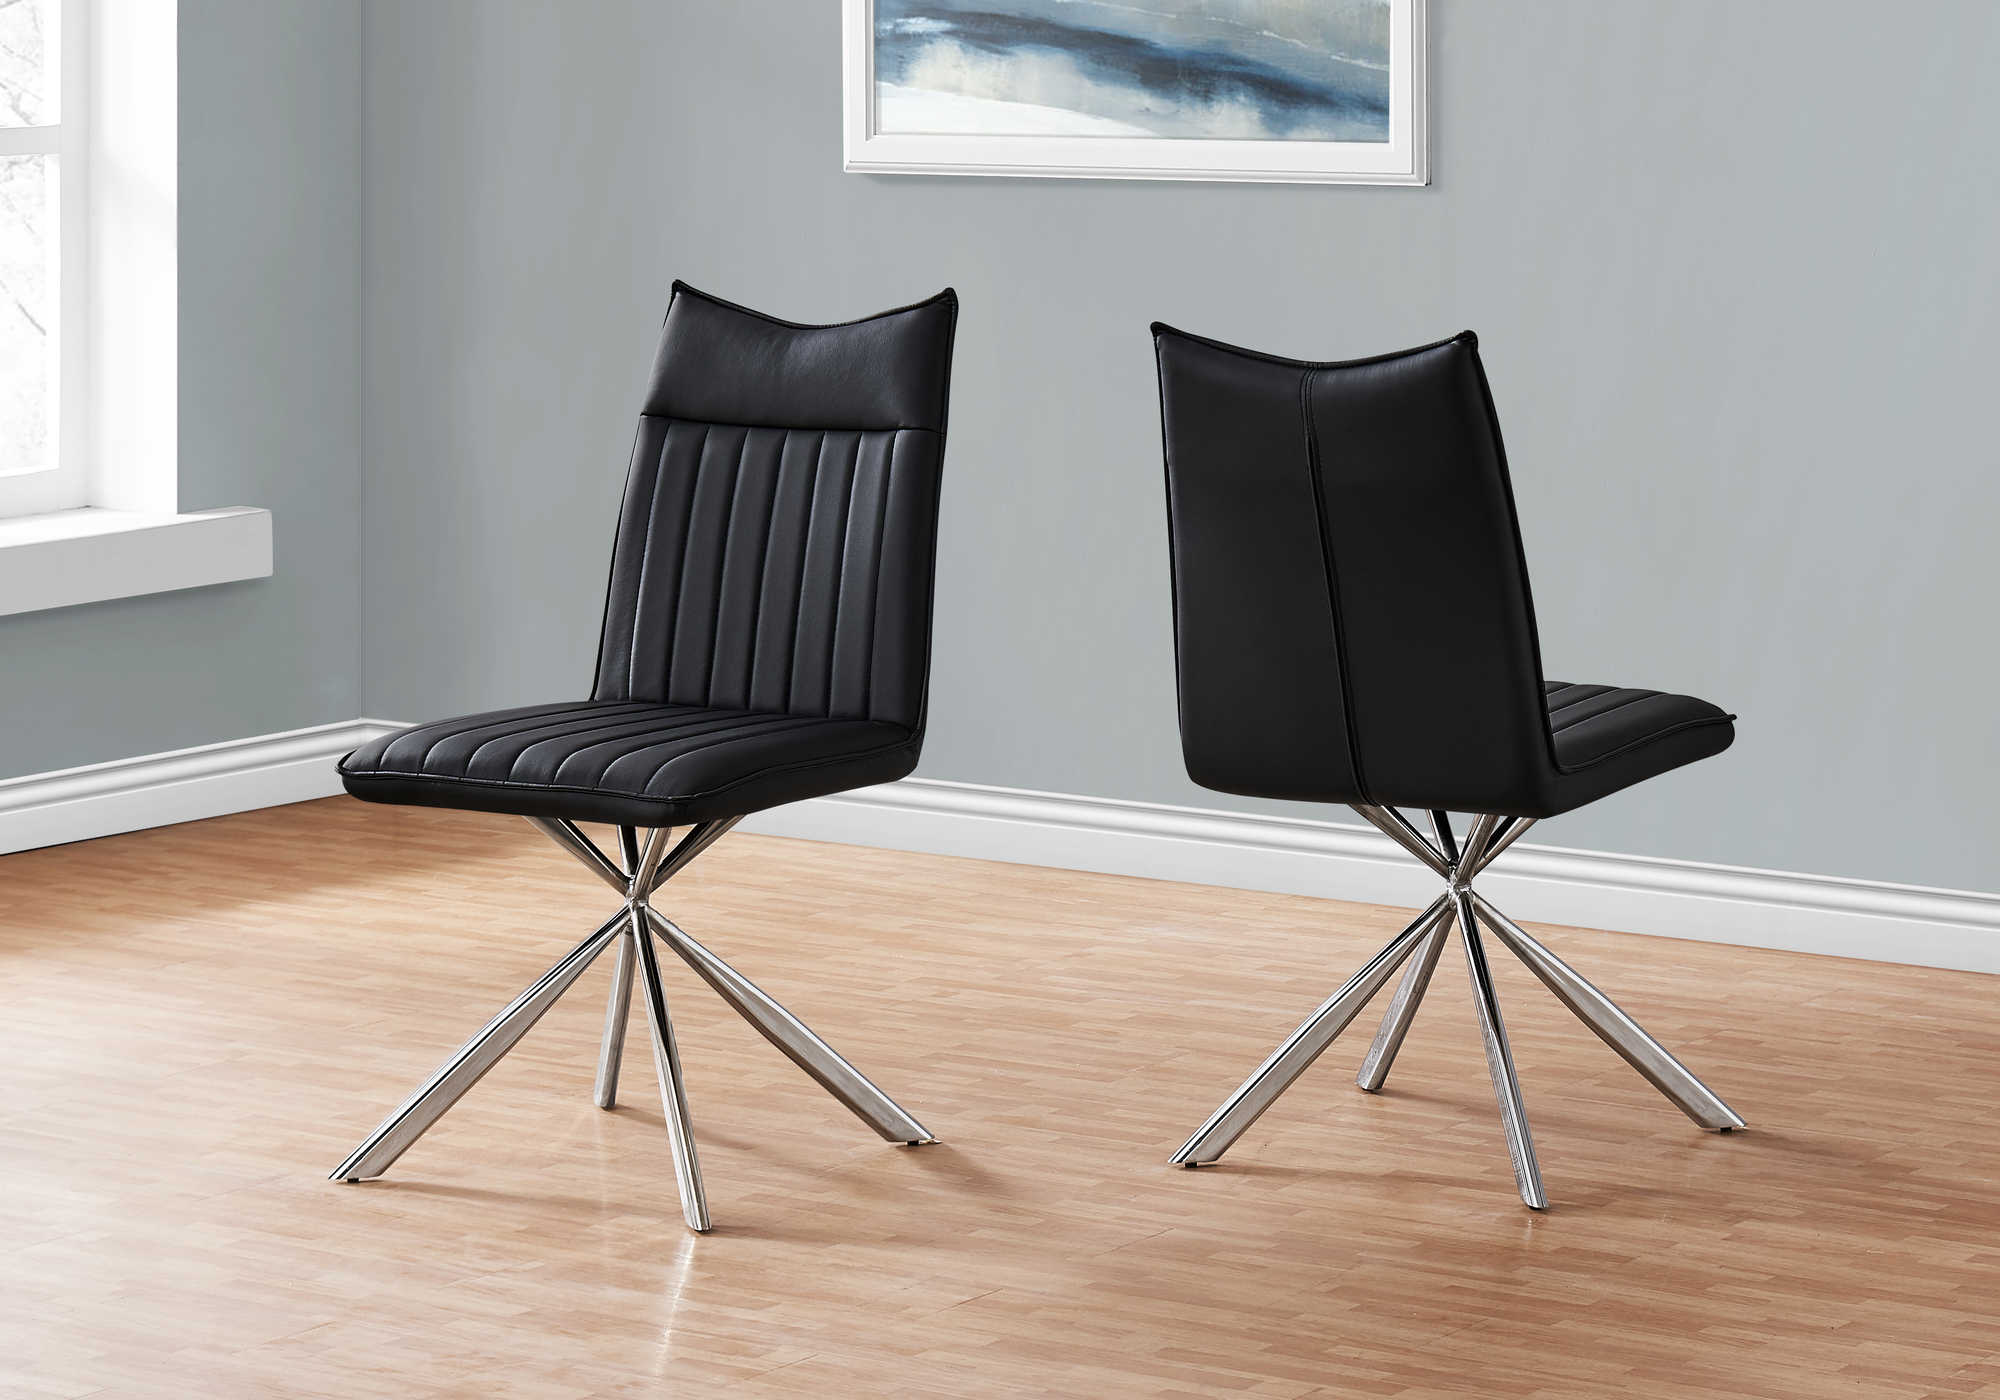 DINING CHAIR - 2PCS / 36"H / BLACK LEATHER-LOOK / CHROME